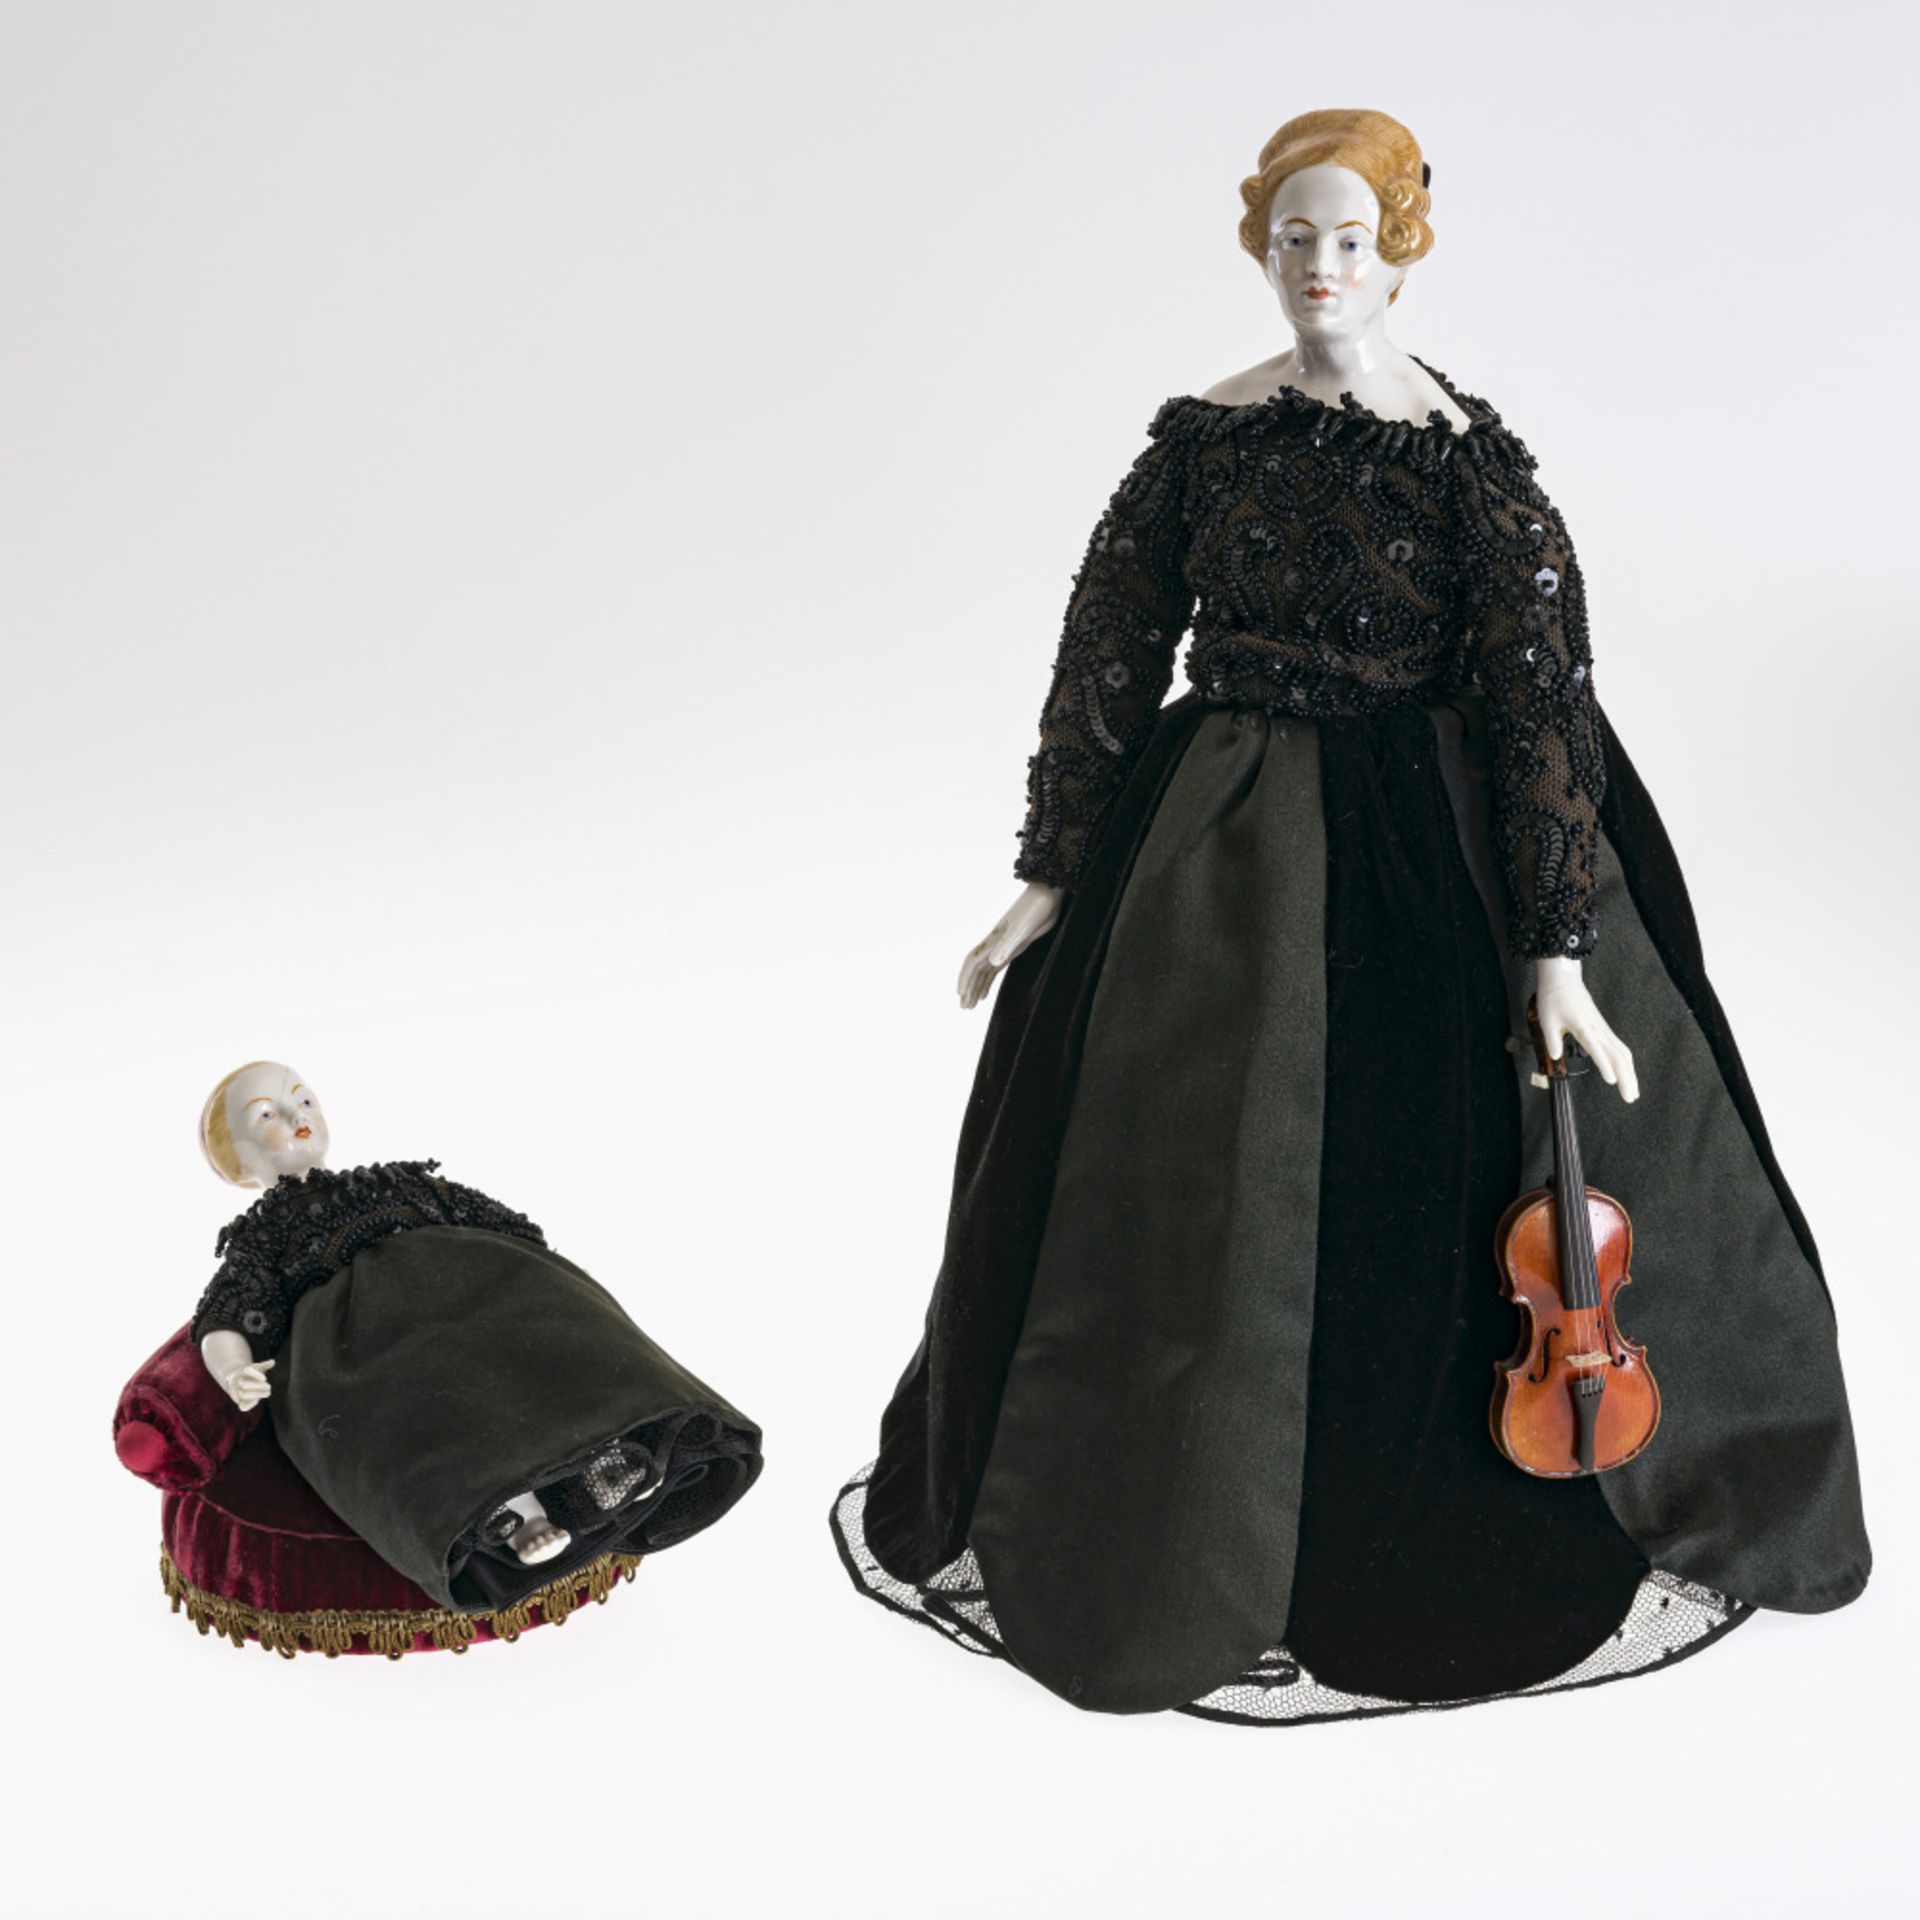 A doll (violinist) in ESCADA dress - Head, arms and legs from Nymphenburg, as of 1997. Later formati